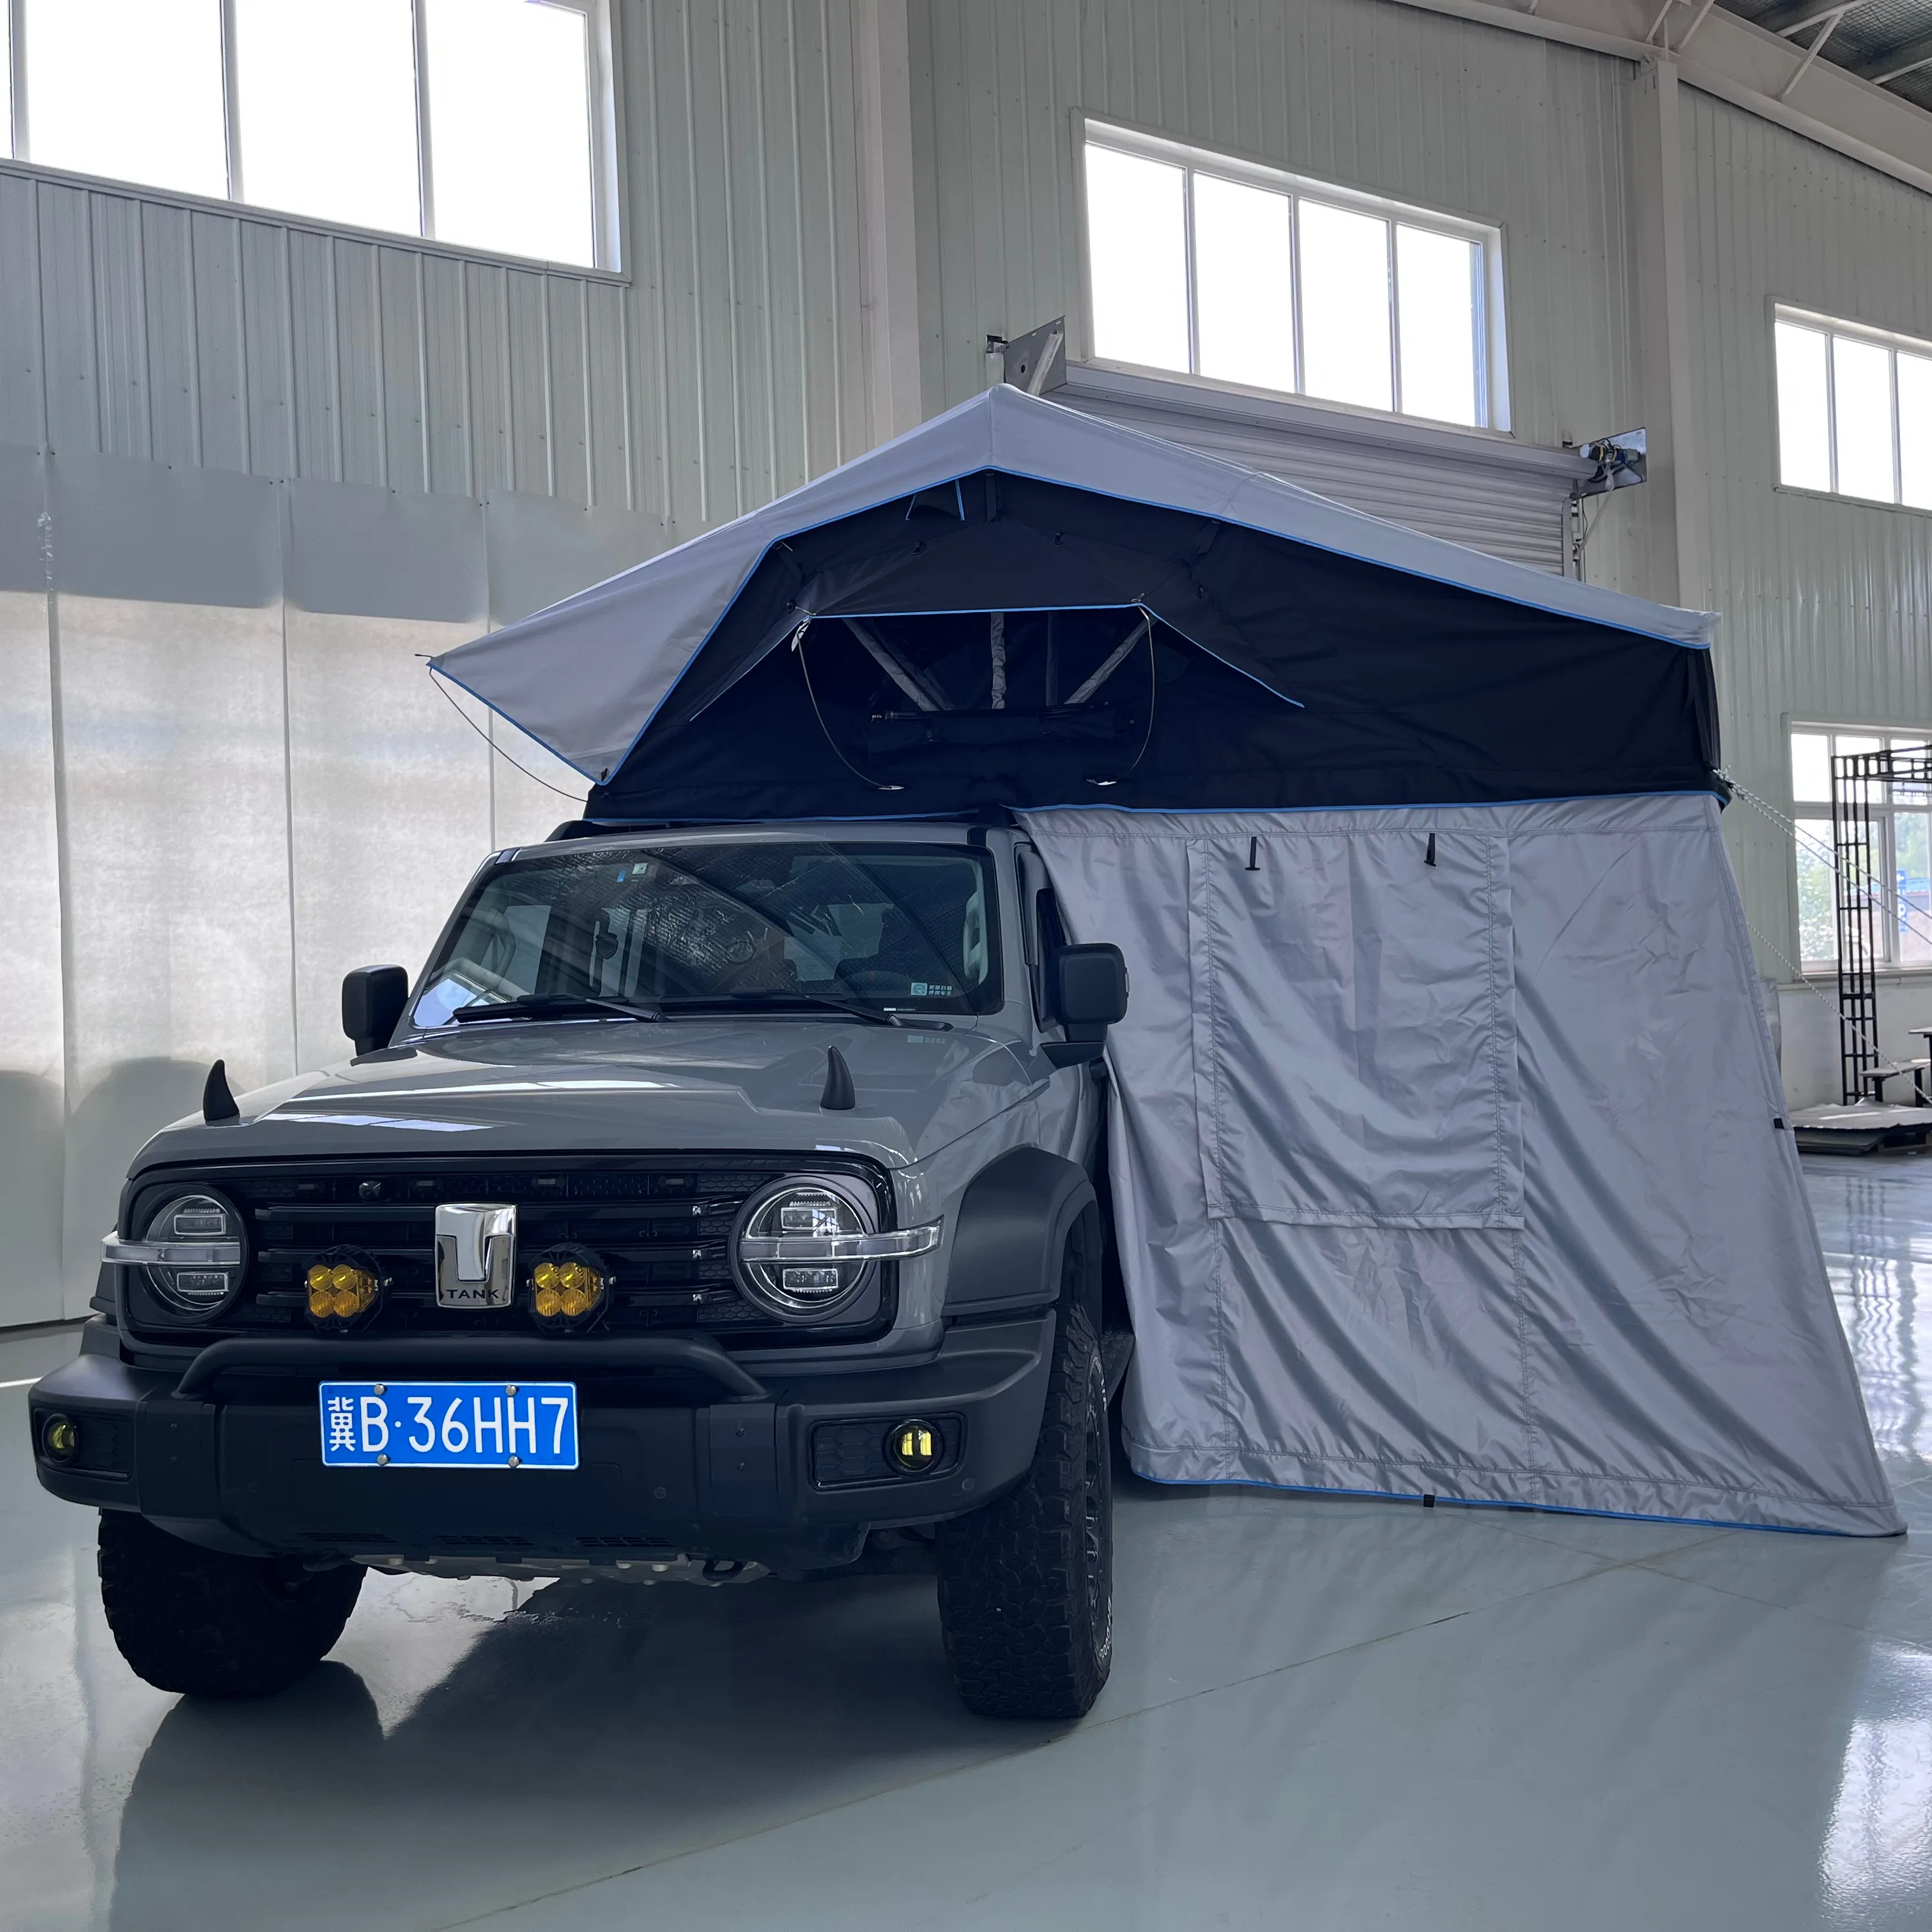 Sunday Campers Manufacturer Tienda De Techo Outdoor 2-4 Person 4x4 Overland SUV Car Camping Waterproof Soft Shell Roof Tent